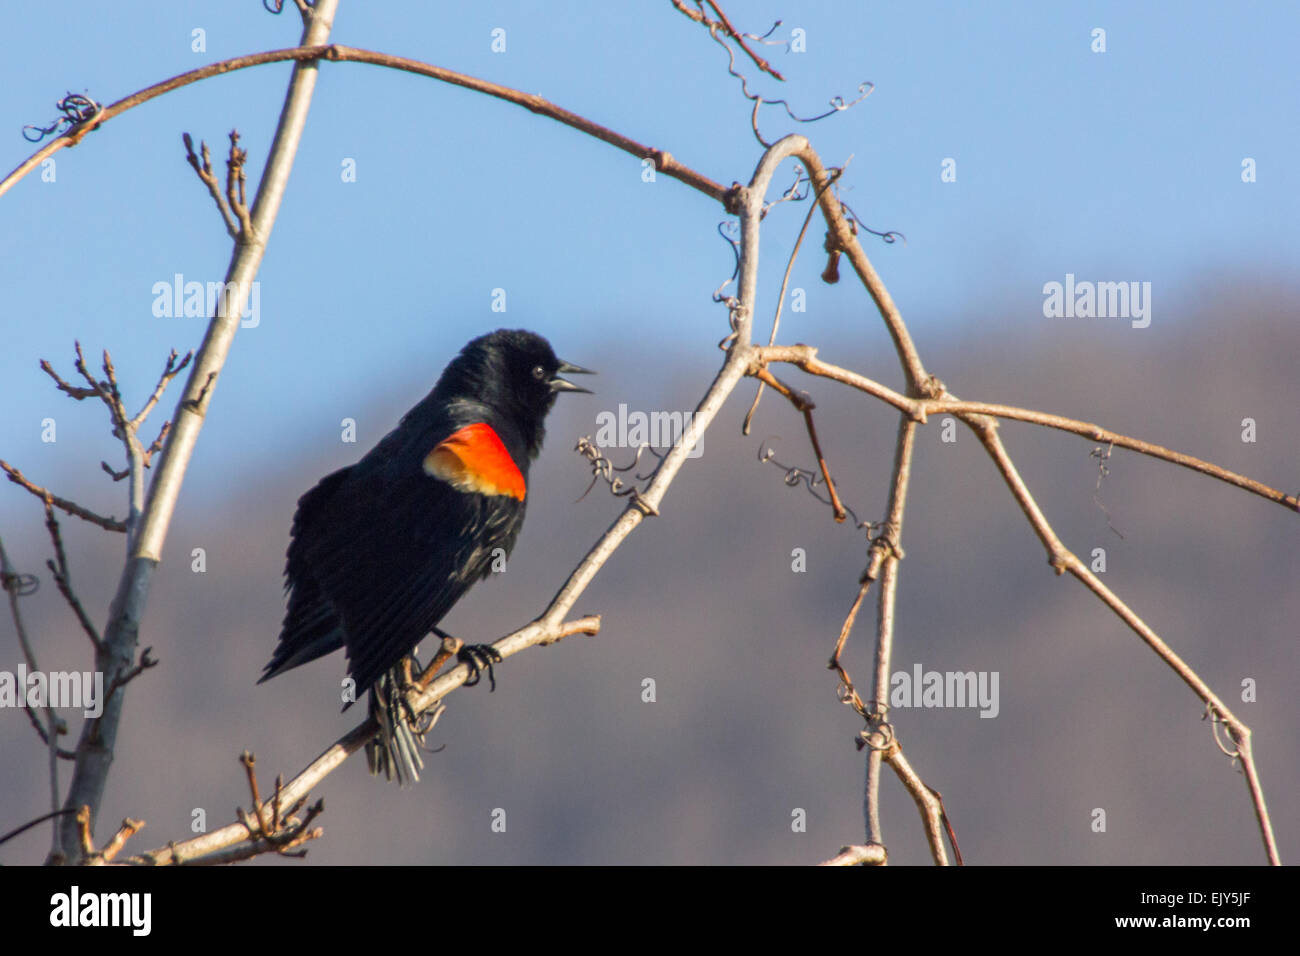 A male Red-winged blackbird sings 'coke or tea' to attract a mate during the springtime. Stock Photo